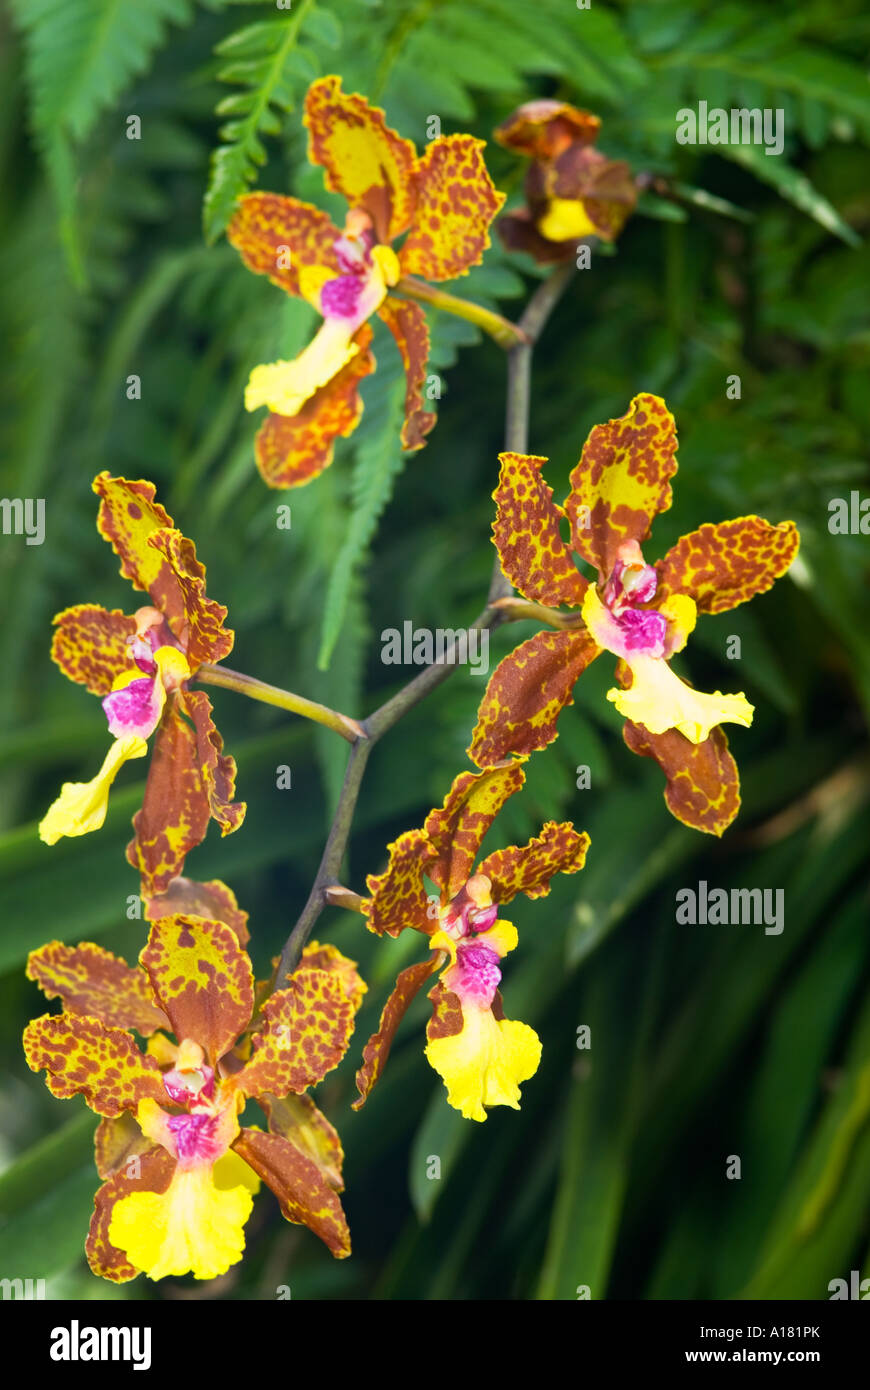 Cypripedium  orchid  Orchids blossom risp in garden outside SINGAPORE ASIA Stock Photo